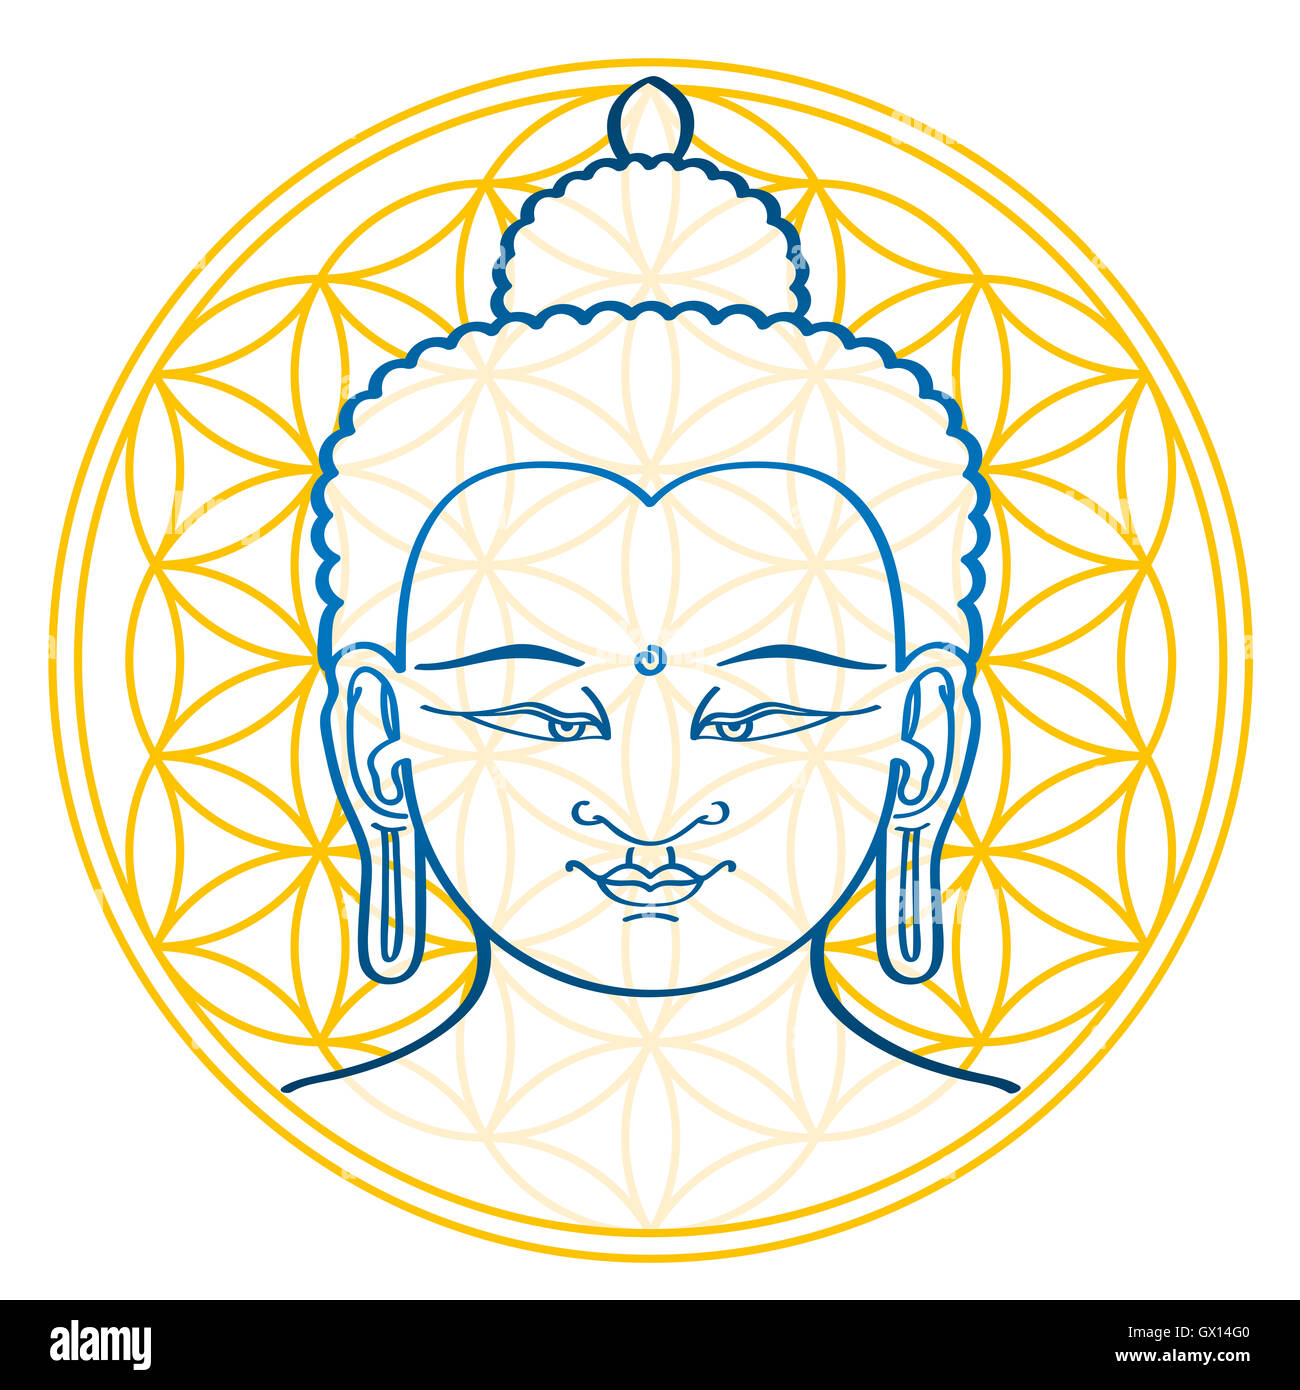 Buddha and the Flower of Life, a geometrical figure and ancient symbol, composed of multiple evenly-spaced, overlapping circles. Stock Photo